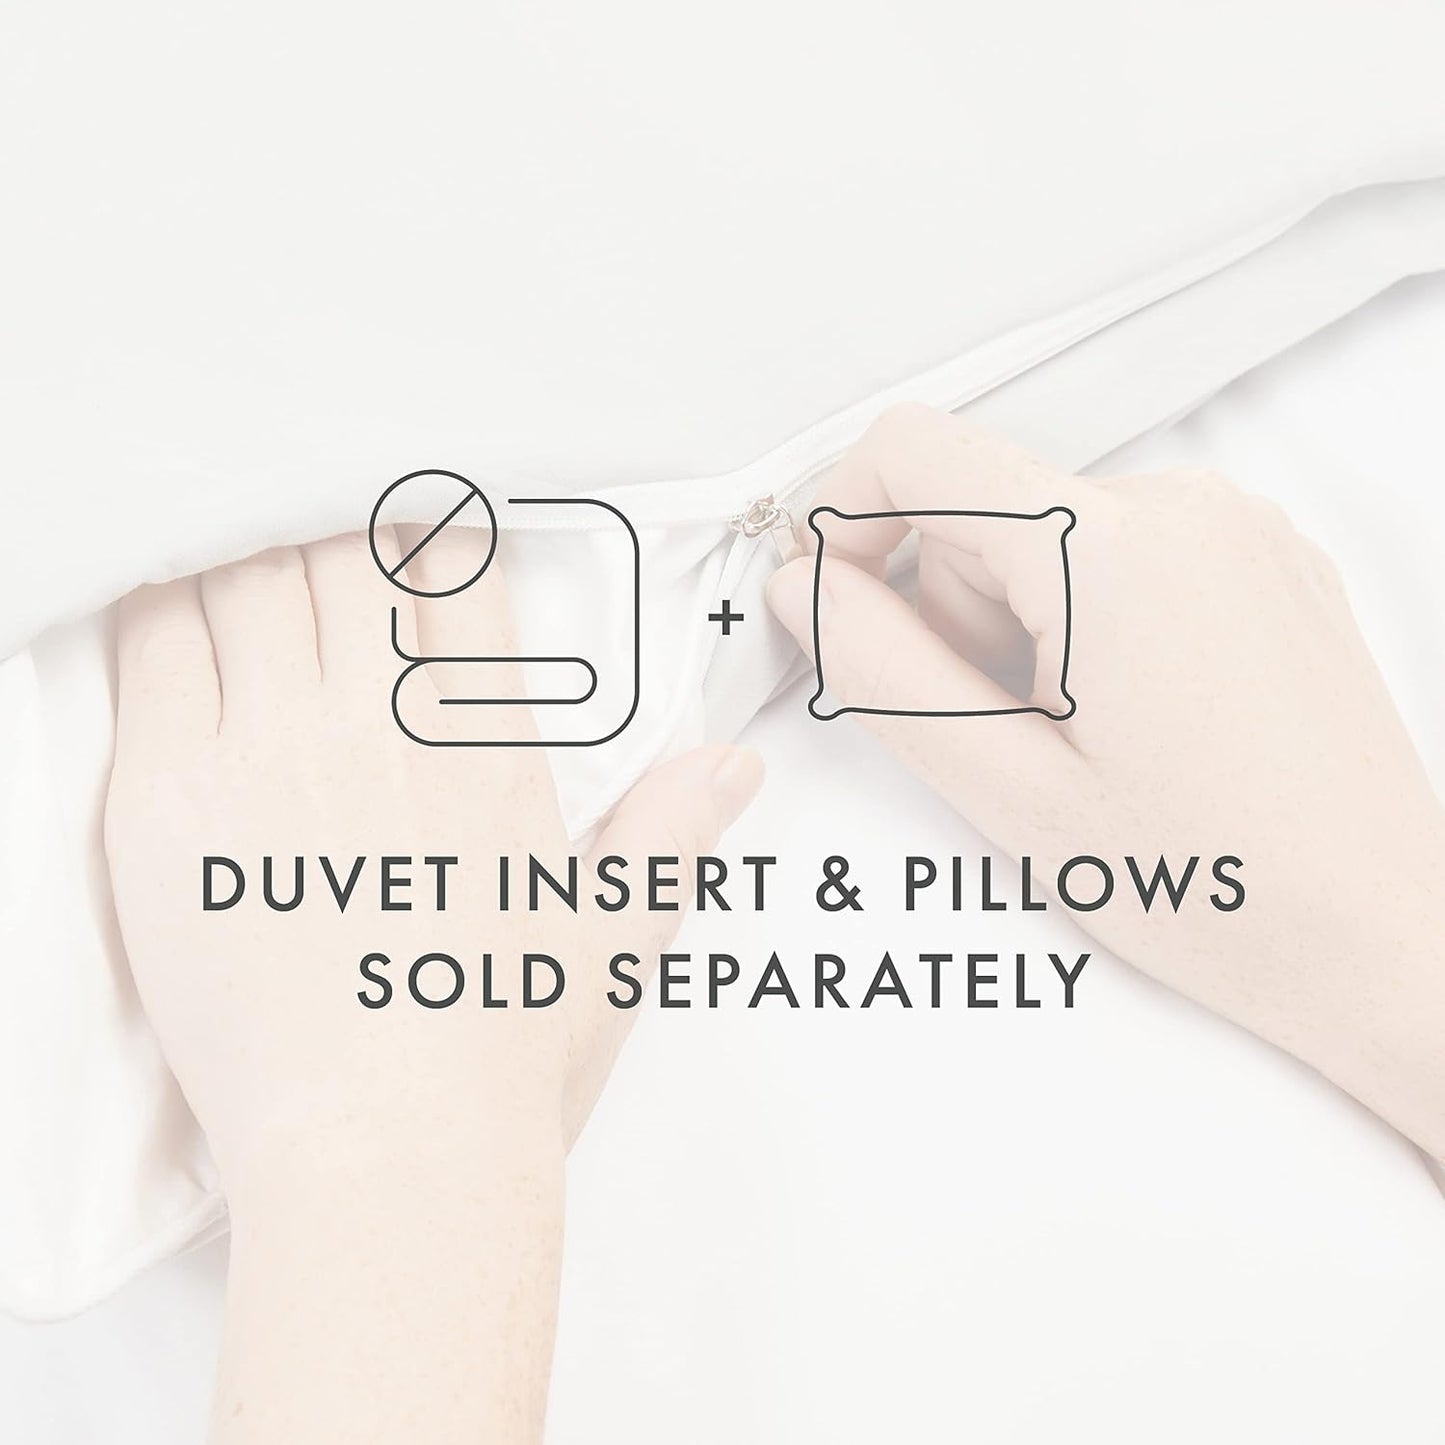 Linen Market Duvet Cover Queen (Sage) - Experience Hotel-Like Comfort with Unparalleled Softness, Exquisite Prints & Solid Colors for a Dreamy Bedroom - Queen Duvet Cover Set with 2 Pillow Shams